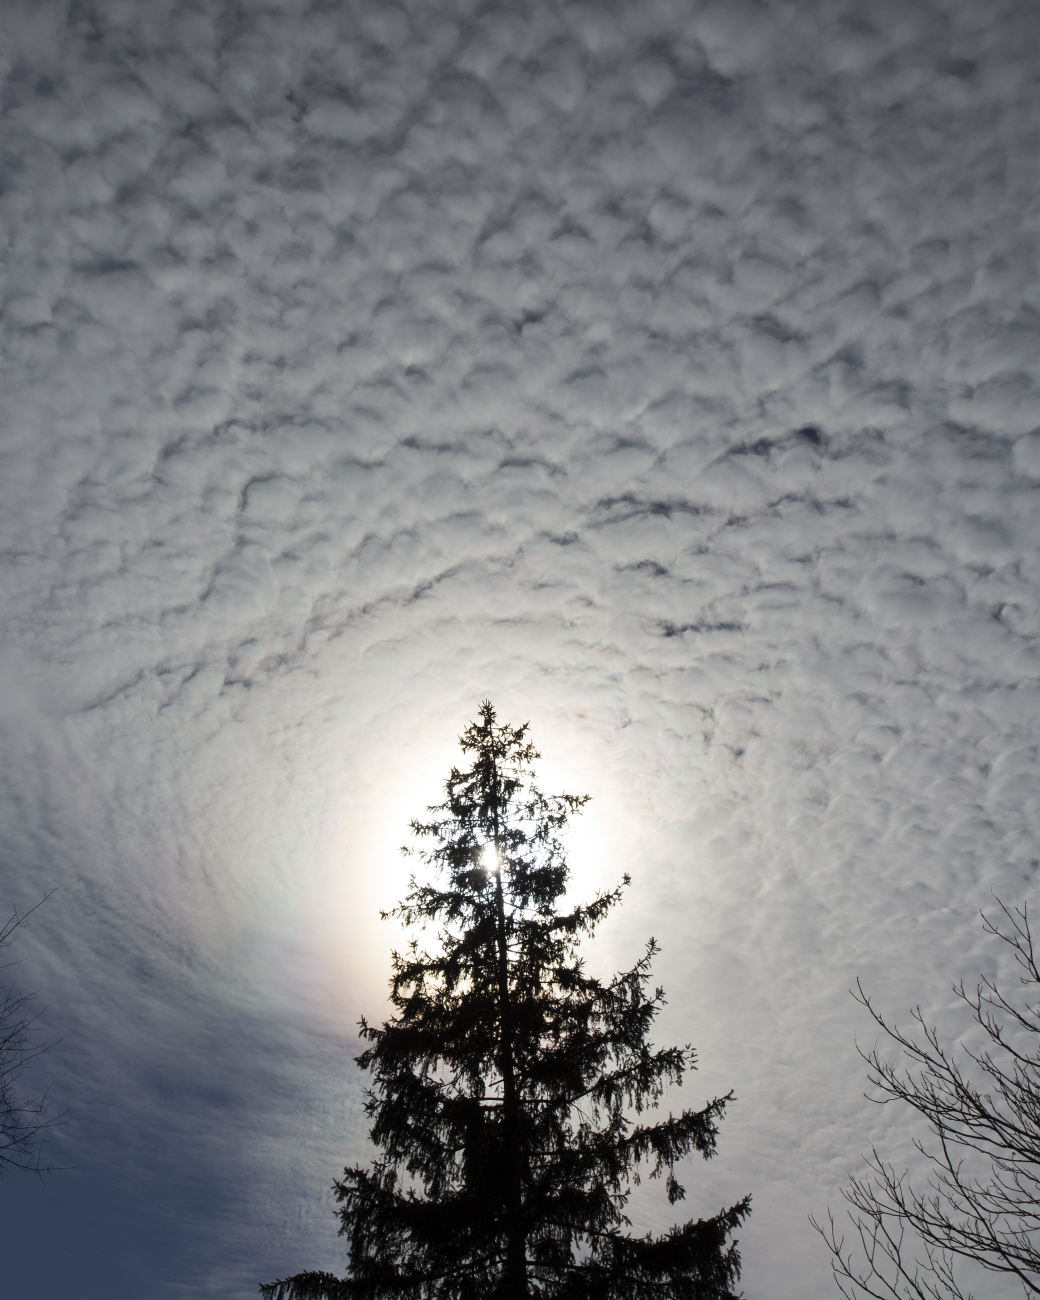 Looking up through the shadow of an evergreen tree, a cloudy vortex patternbecame visible one sunny afternoon in February 2014